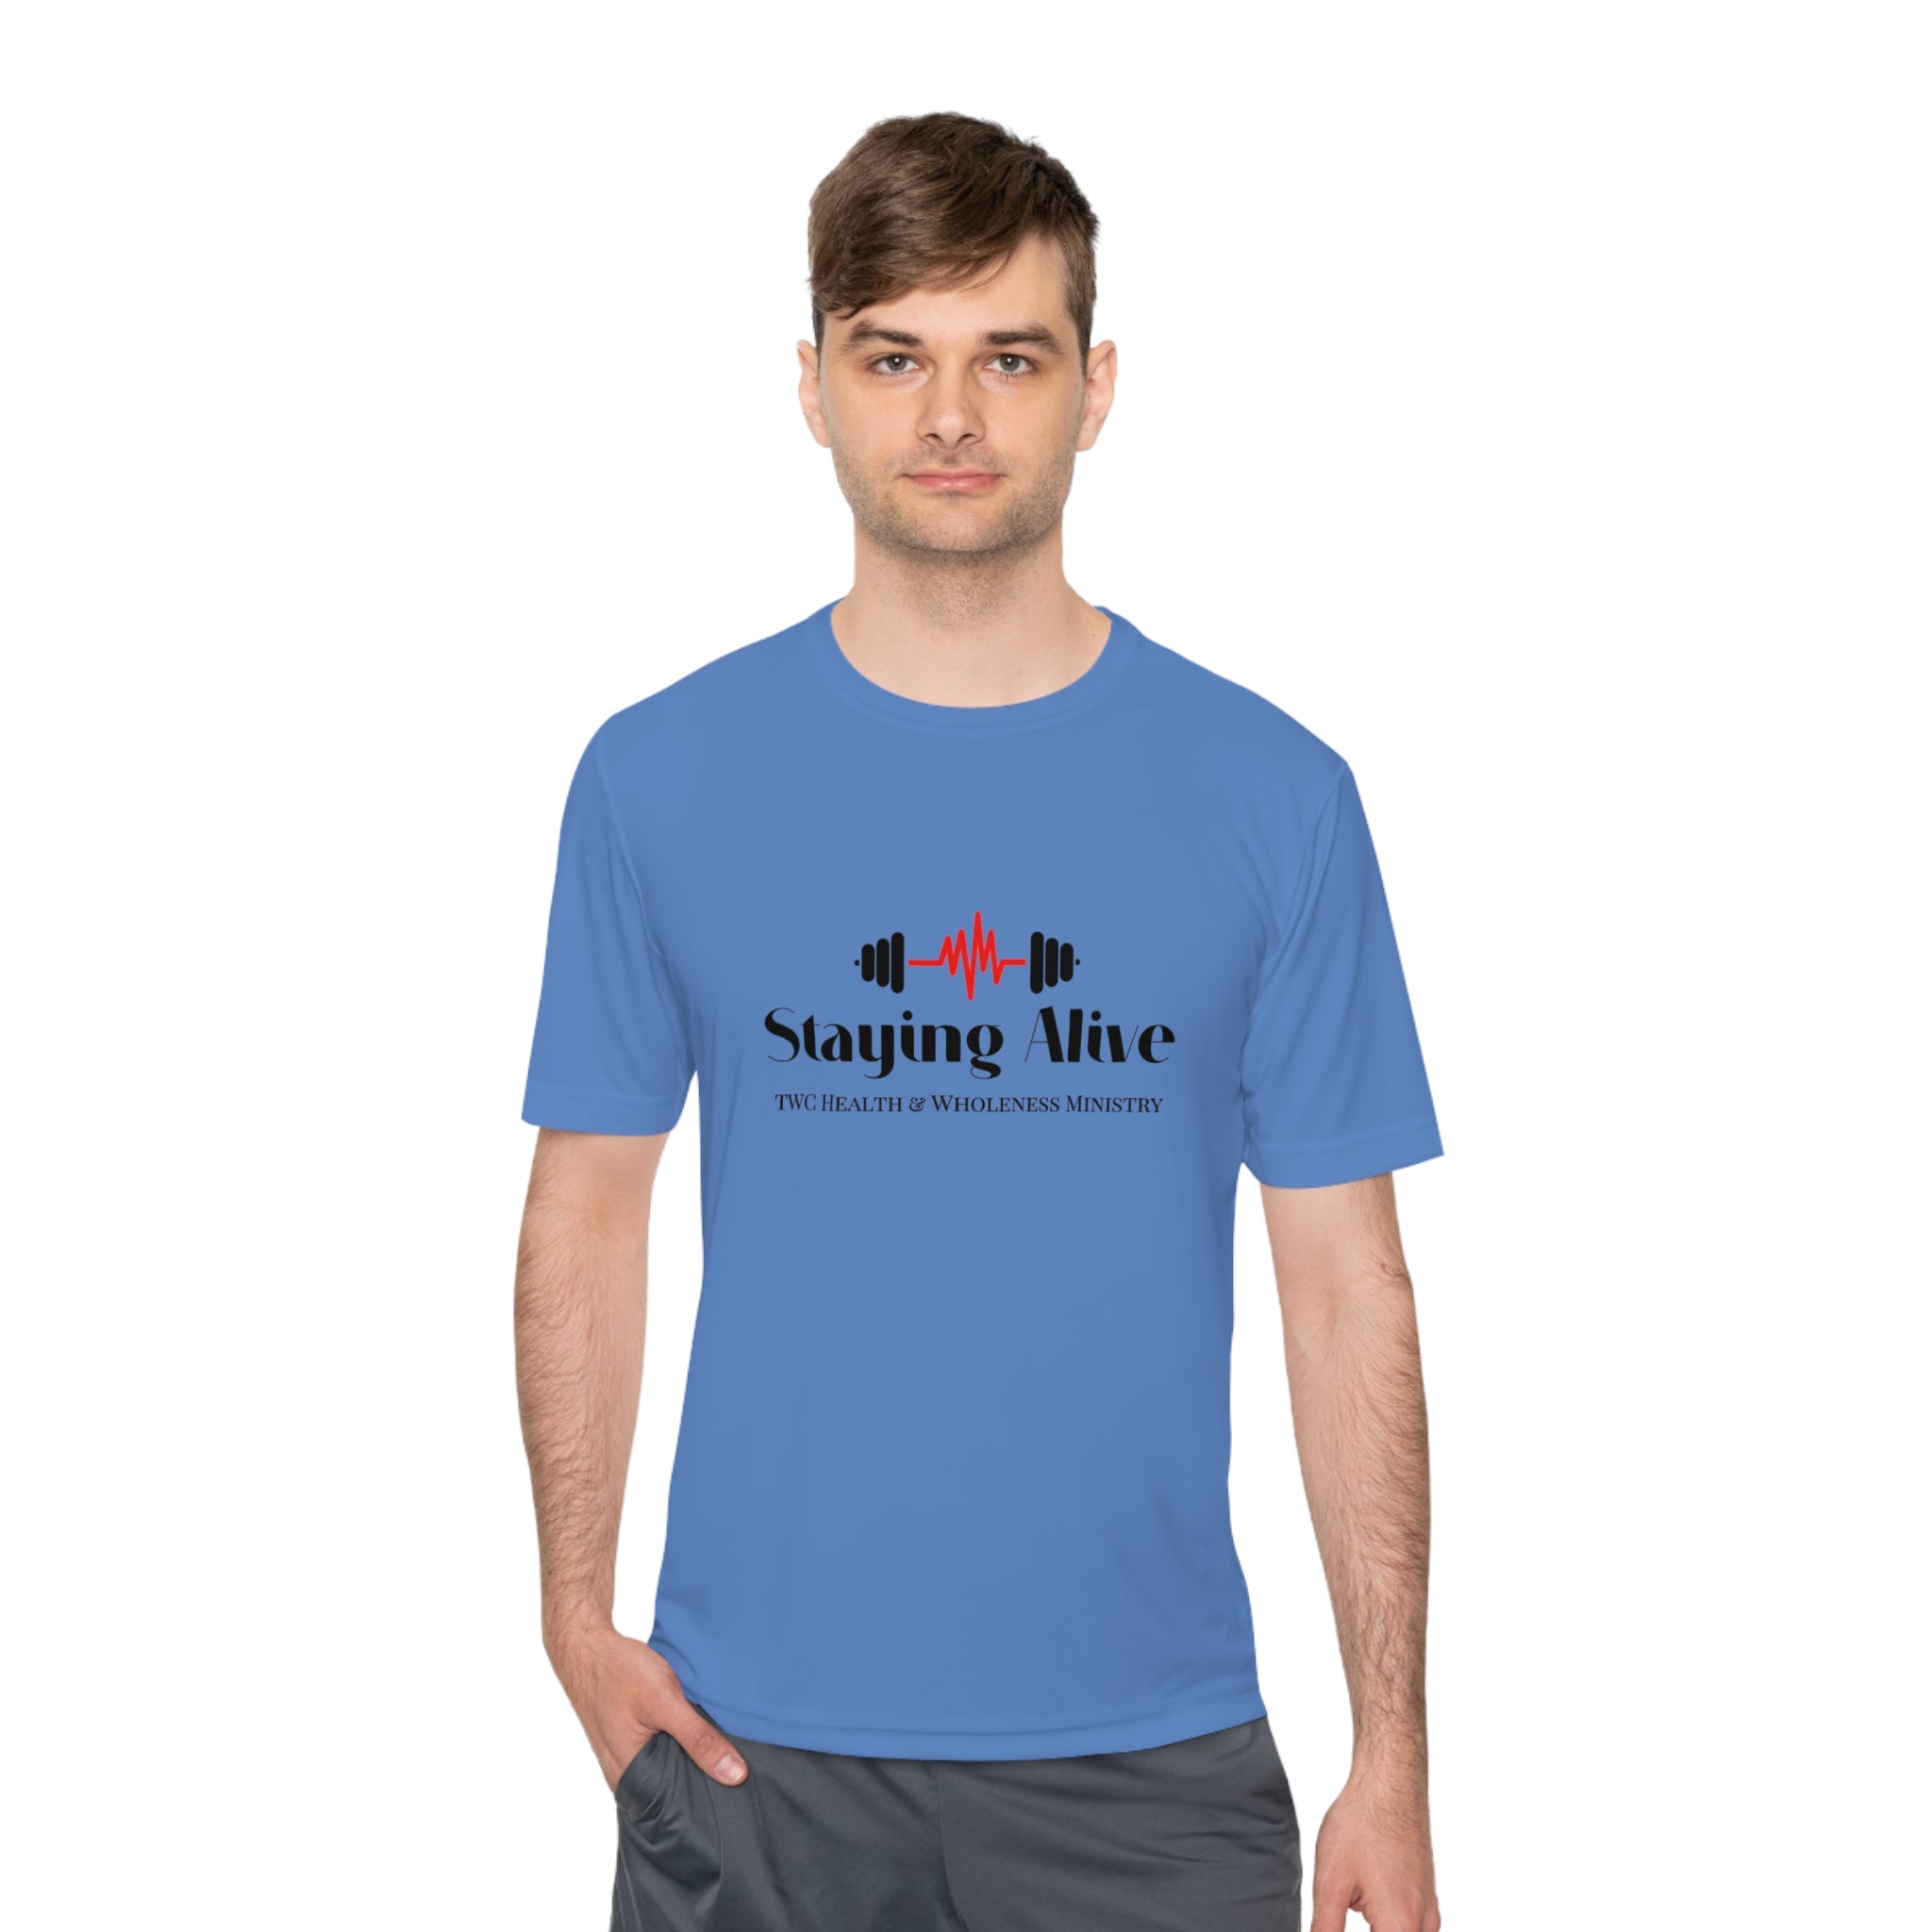 TWC Staying Alive Ministry Unisex Moisture Wicking Tee